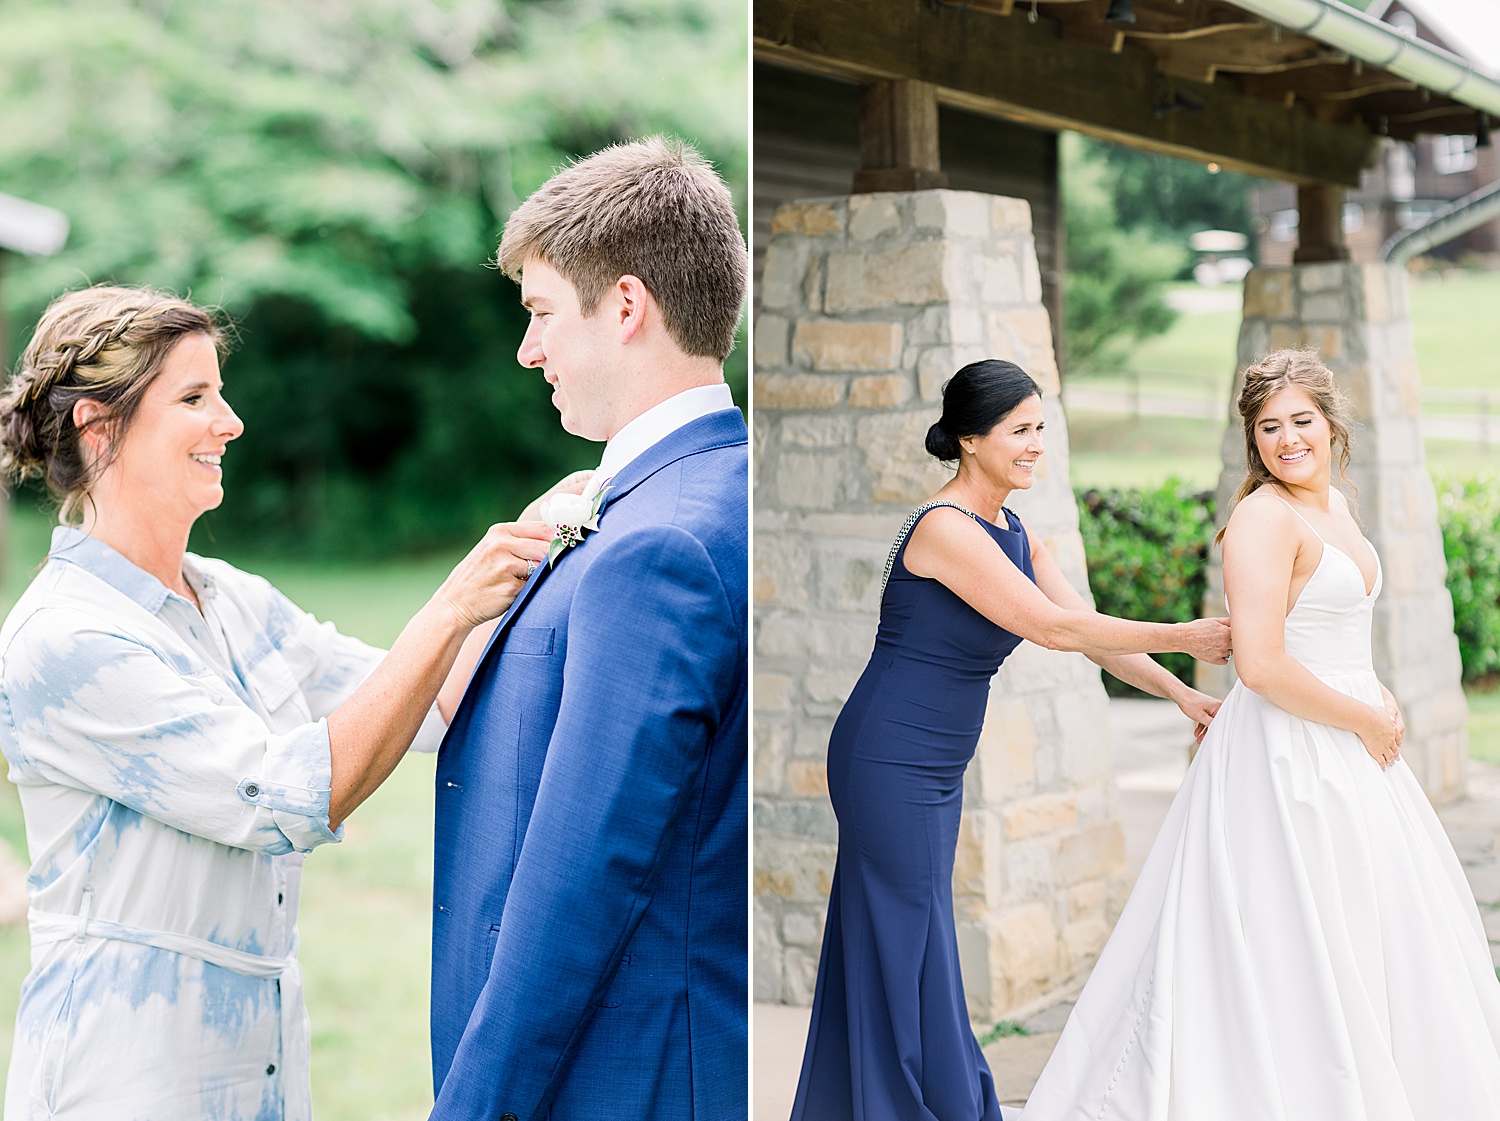 Bride + groom with their moms before AL wedding ceremony captured by Chelsea Morton photography